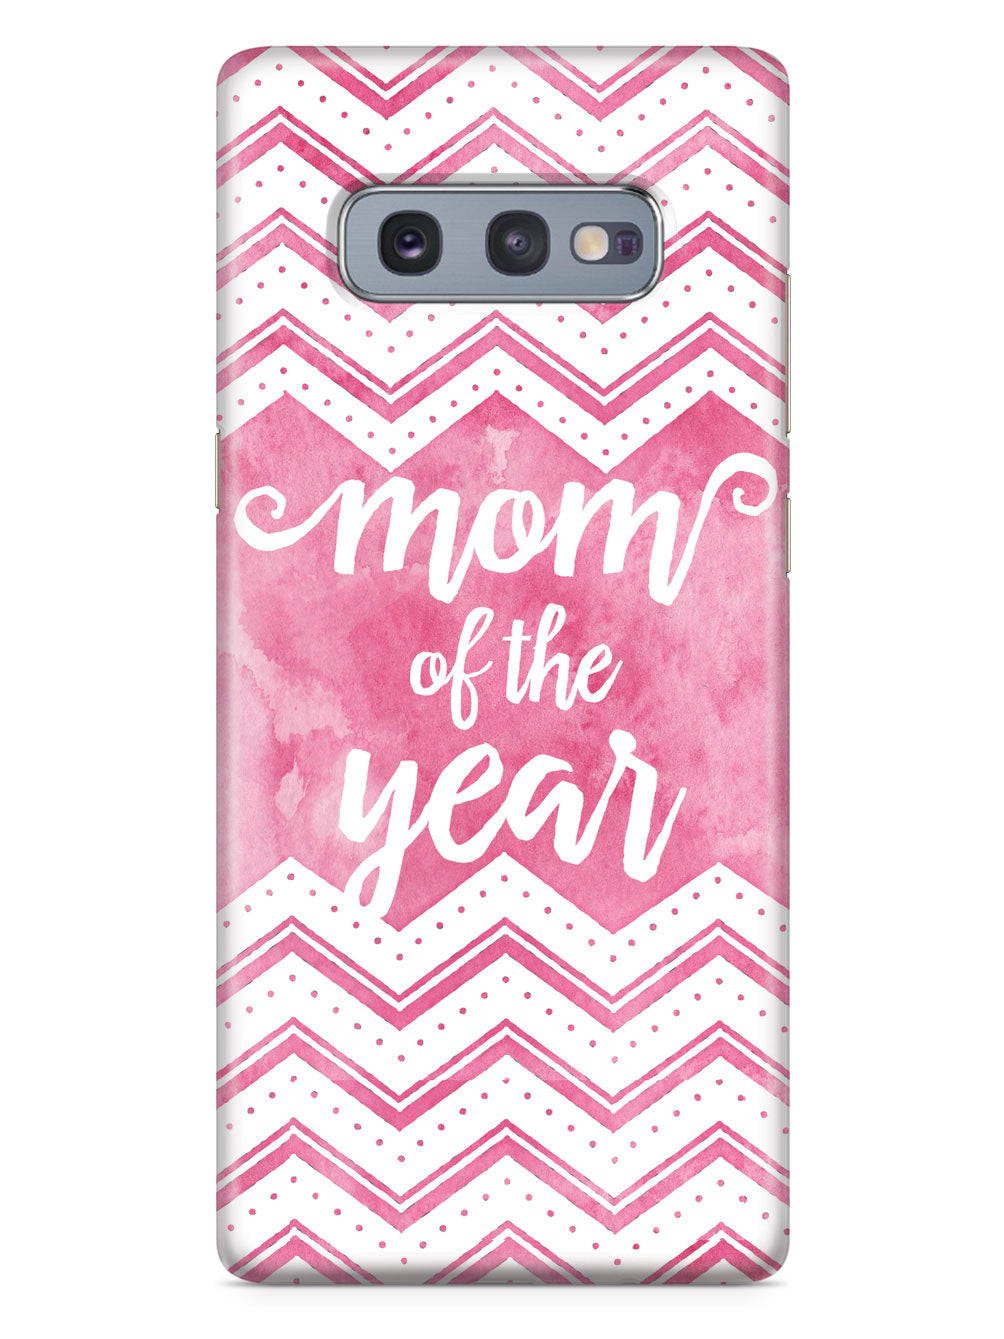 Mom of the Year - Pink Case